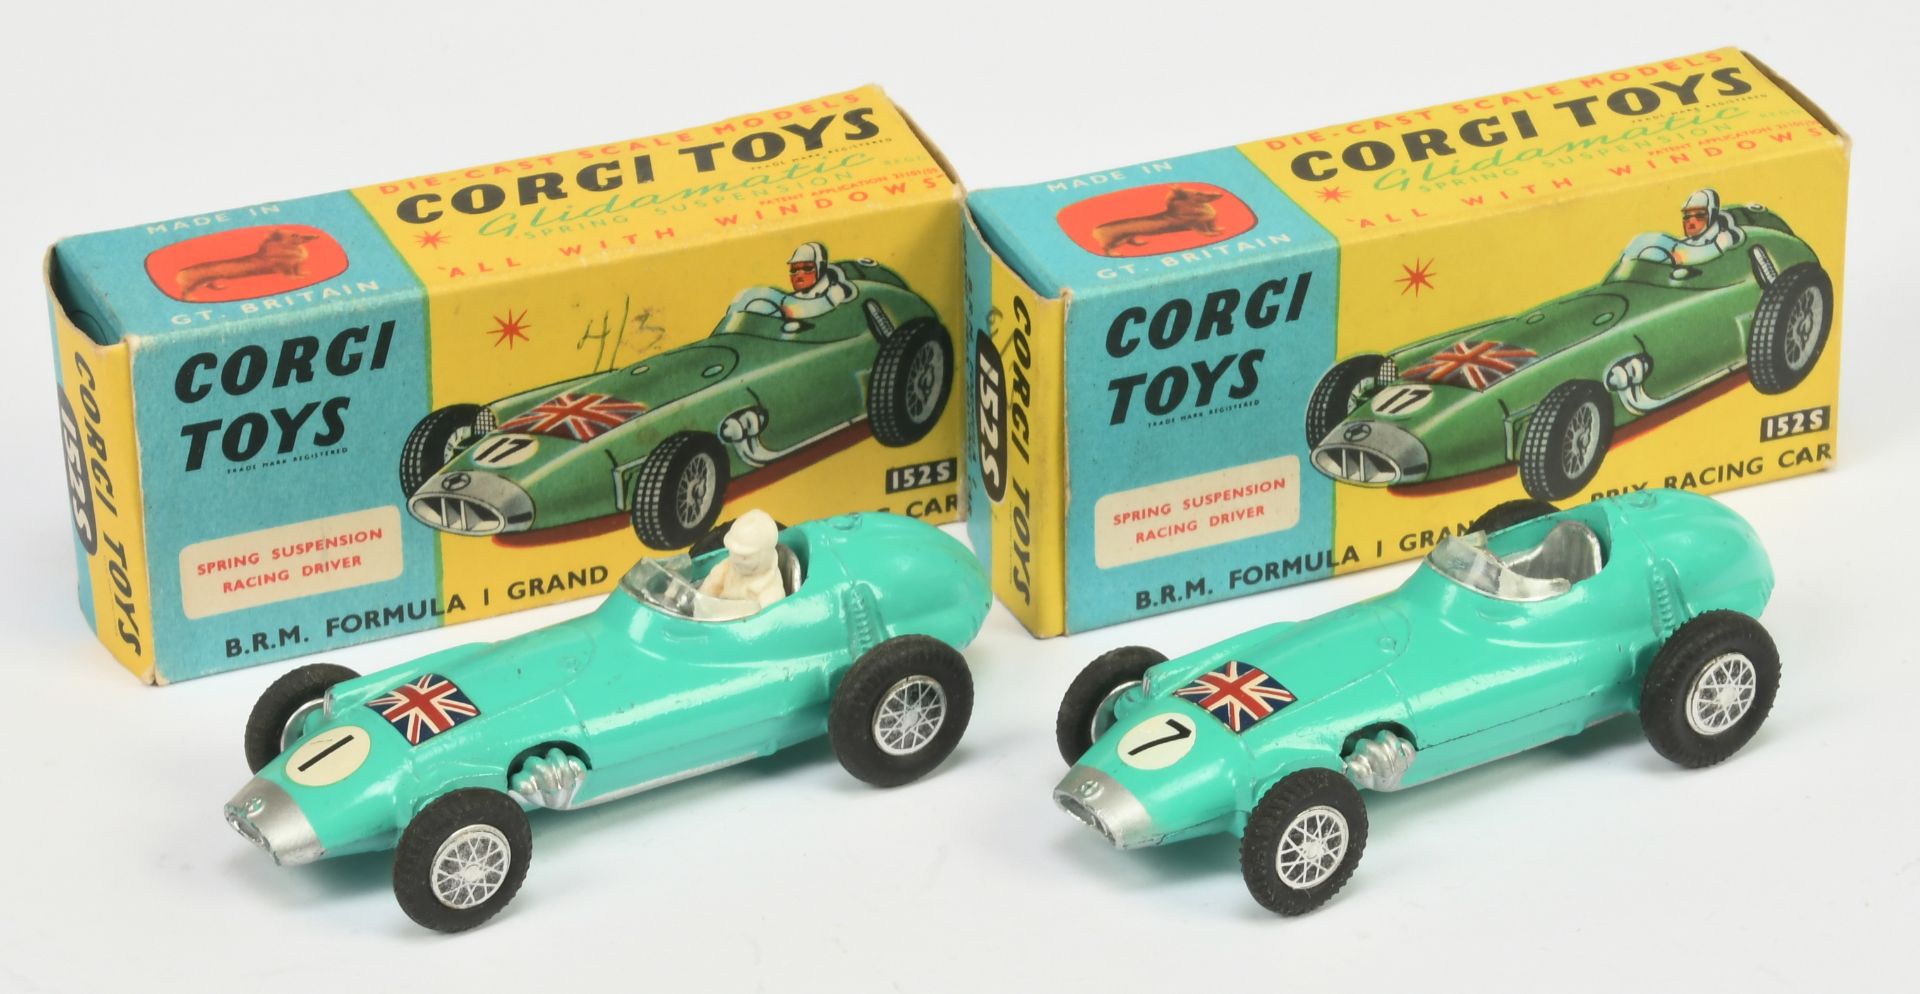 Corgi Toys 152S BRM Formula 1 Racing Car A Pair - (1) Turquoise body, silver trim and nose, figur...